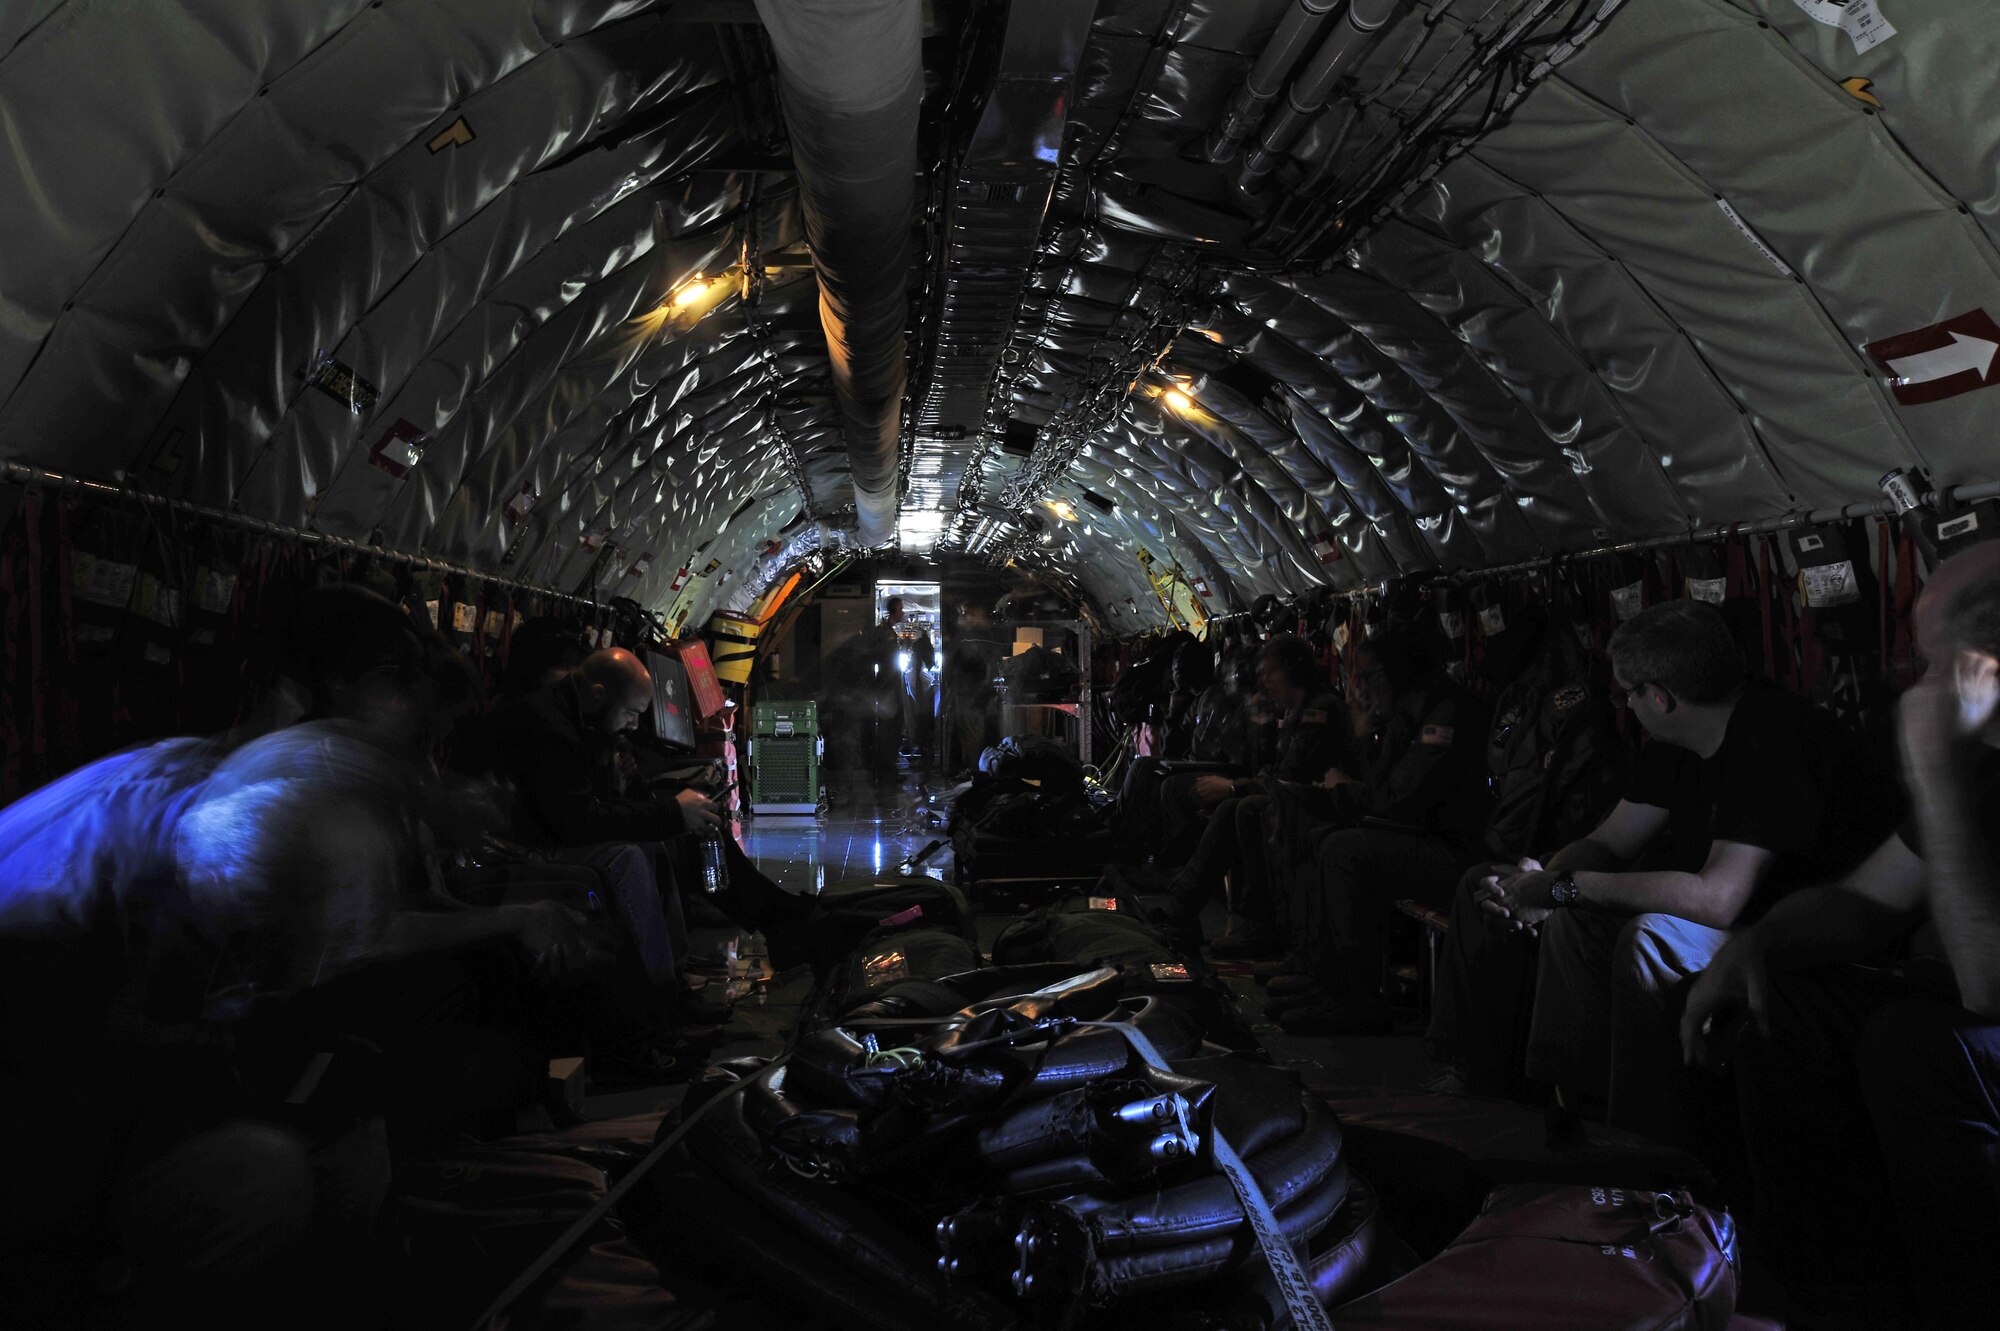 Civilian employers of Reservists and Guardsmen based at Andrews flew in a KC-135R Stratotanker refueling aircraft here Sept. 9 during an Employer Support of the Guard and Reserve-sponsored flight. The flight was an ESGR effort to thank supportive employers of 459th Air Refueling Wing Reservists and 113th Wing D.C. Air National Guardsmen. Employers were flown from Joint Base Andrews to the coast of New Jersey to see an aerial refueling with F-16 Fighting Falcons. (U.S. Air Force photo/Tech. Sgt. Brent Skeen)